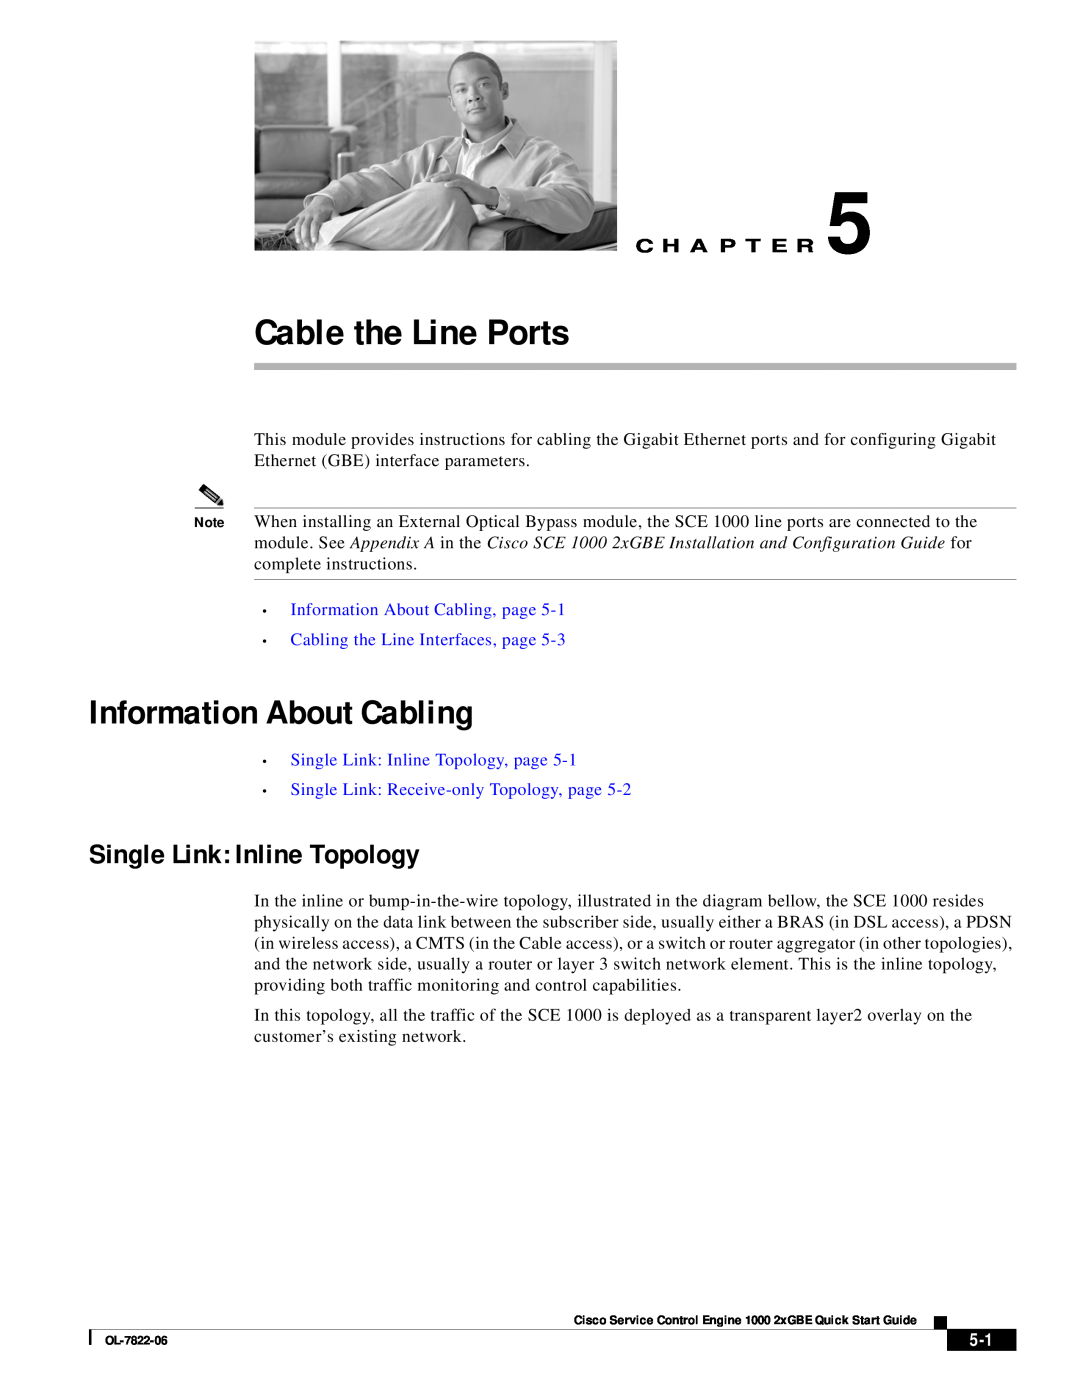 Cisco Systems OL-7822-06 Cable the Line Ports, Information About Cabling, Single Link Inline Topology, C H A P T E R 